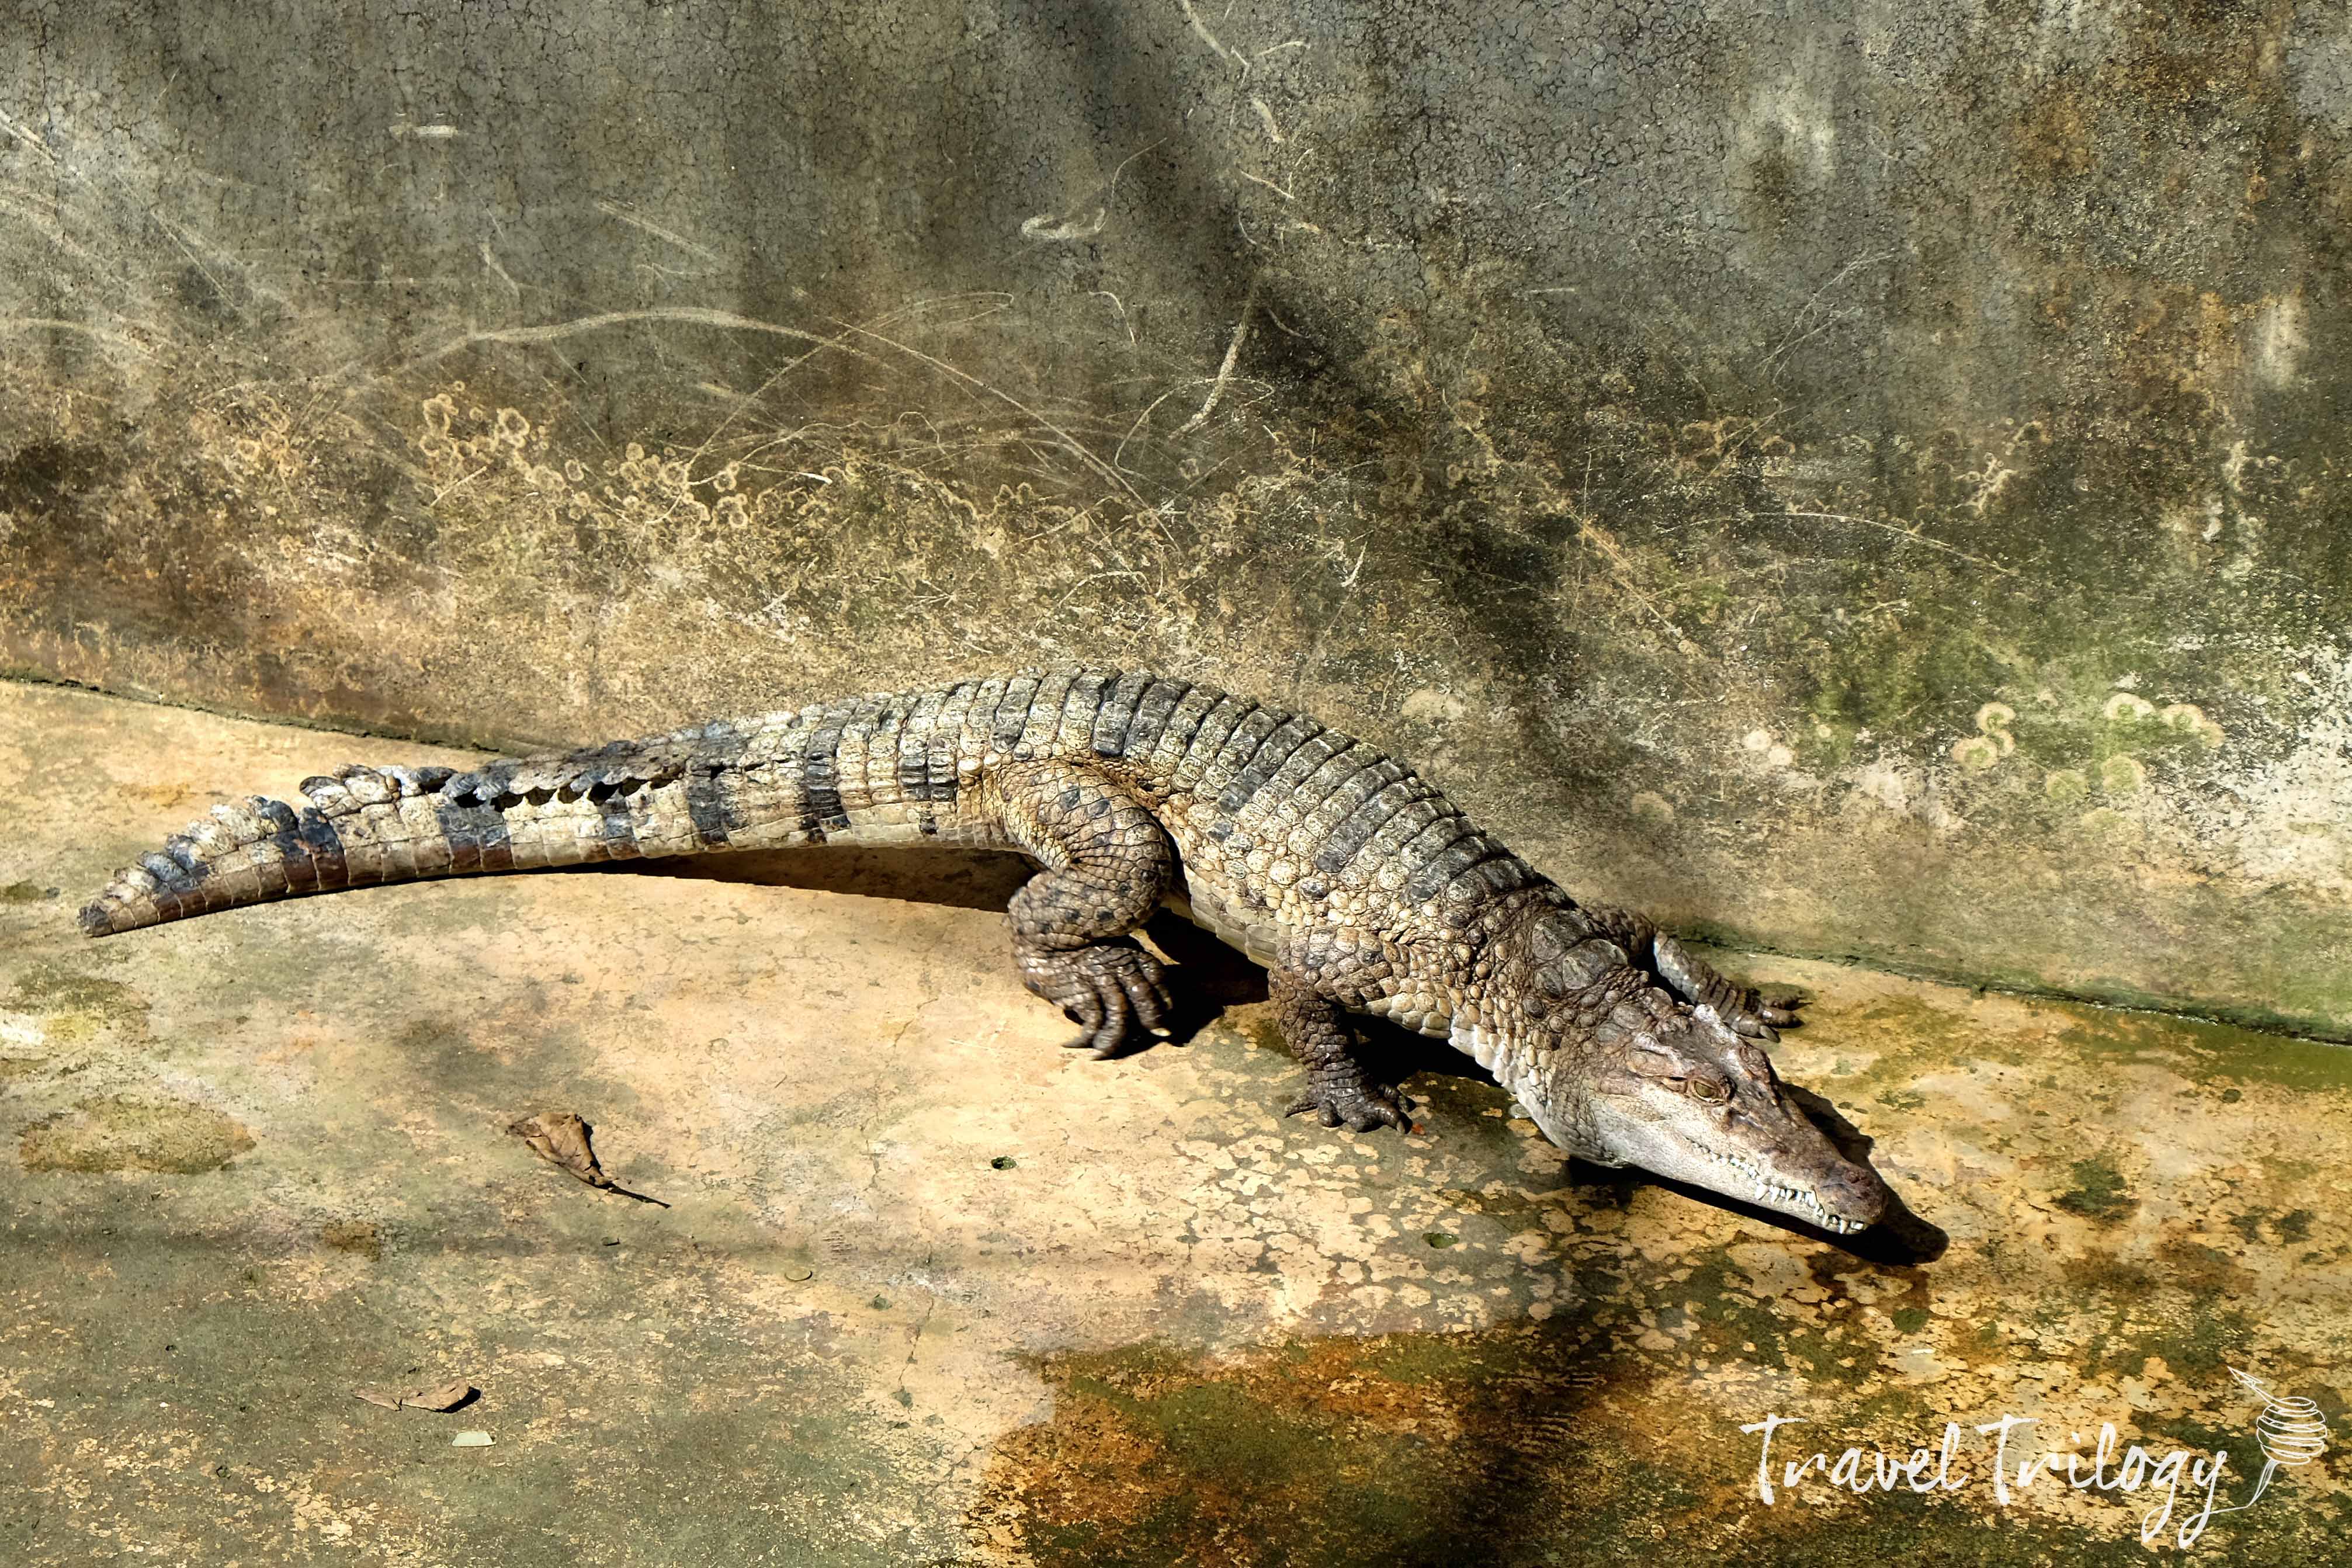 Local crocodiles are bred in the farm. It is also where huge crocs captured from its habitat are kept for scientific studies.